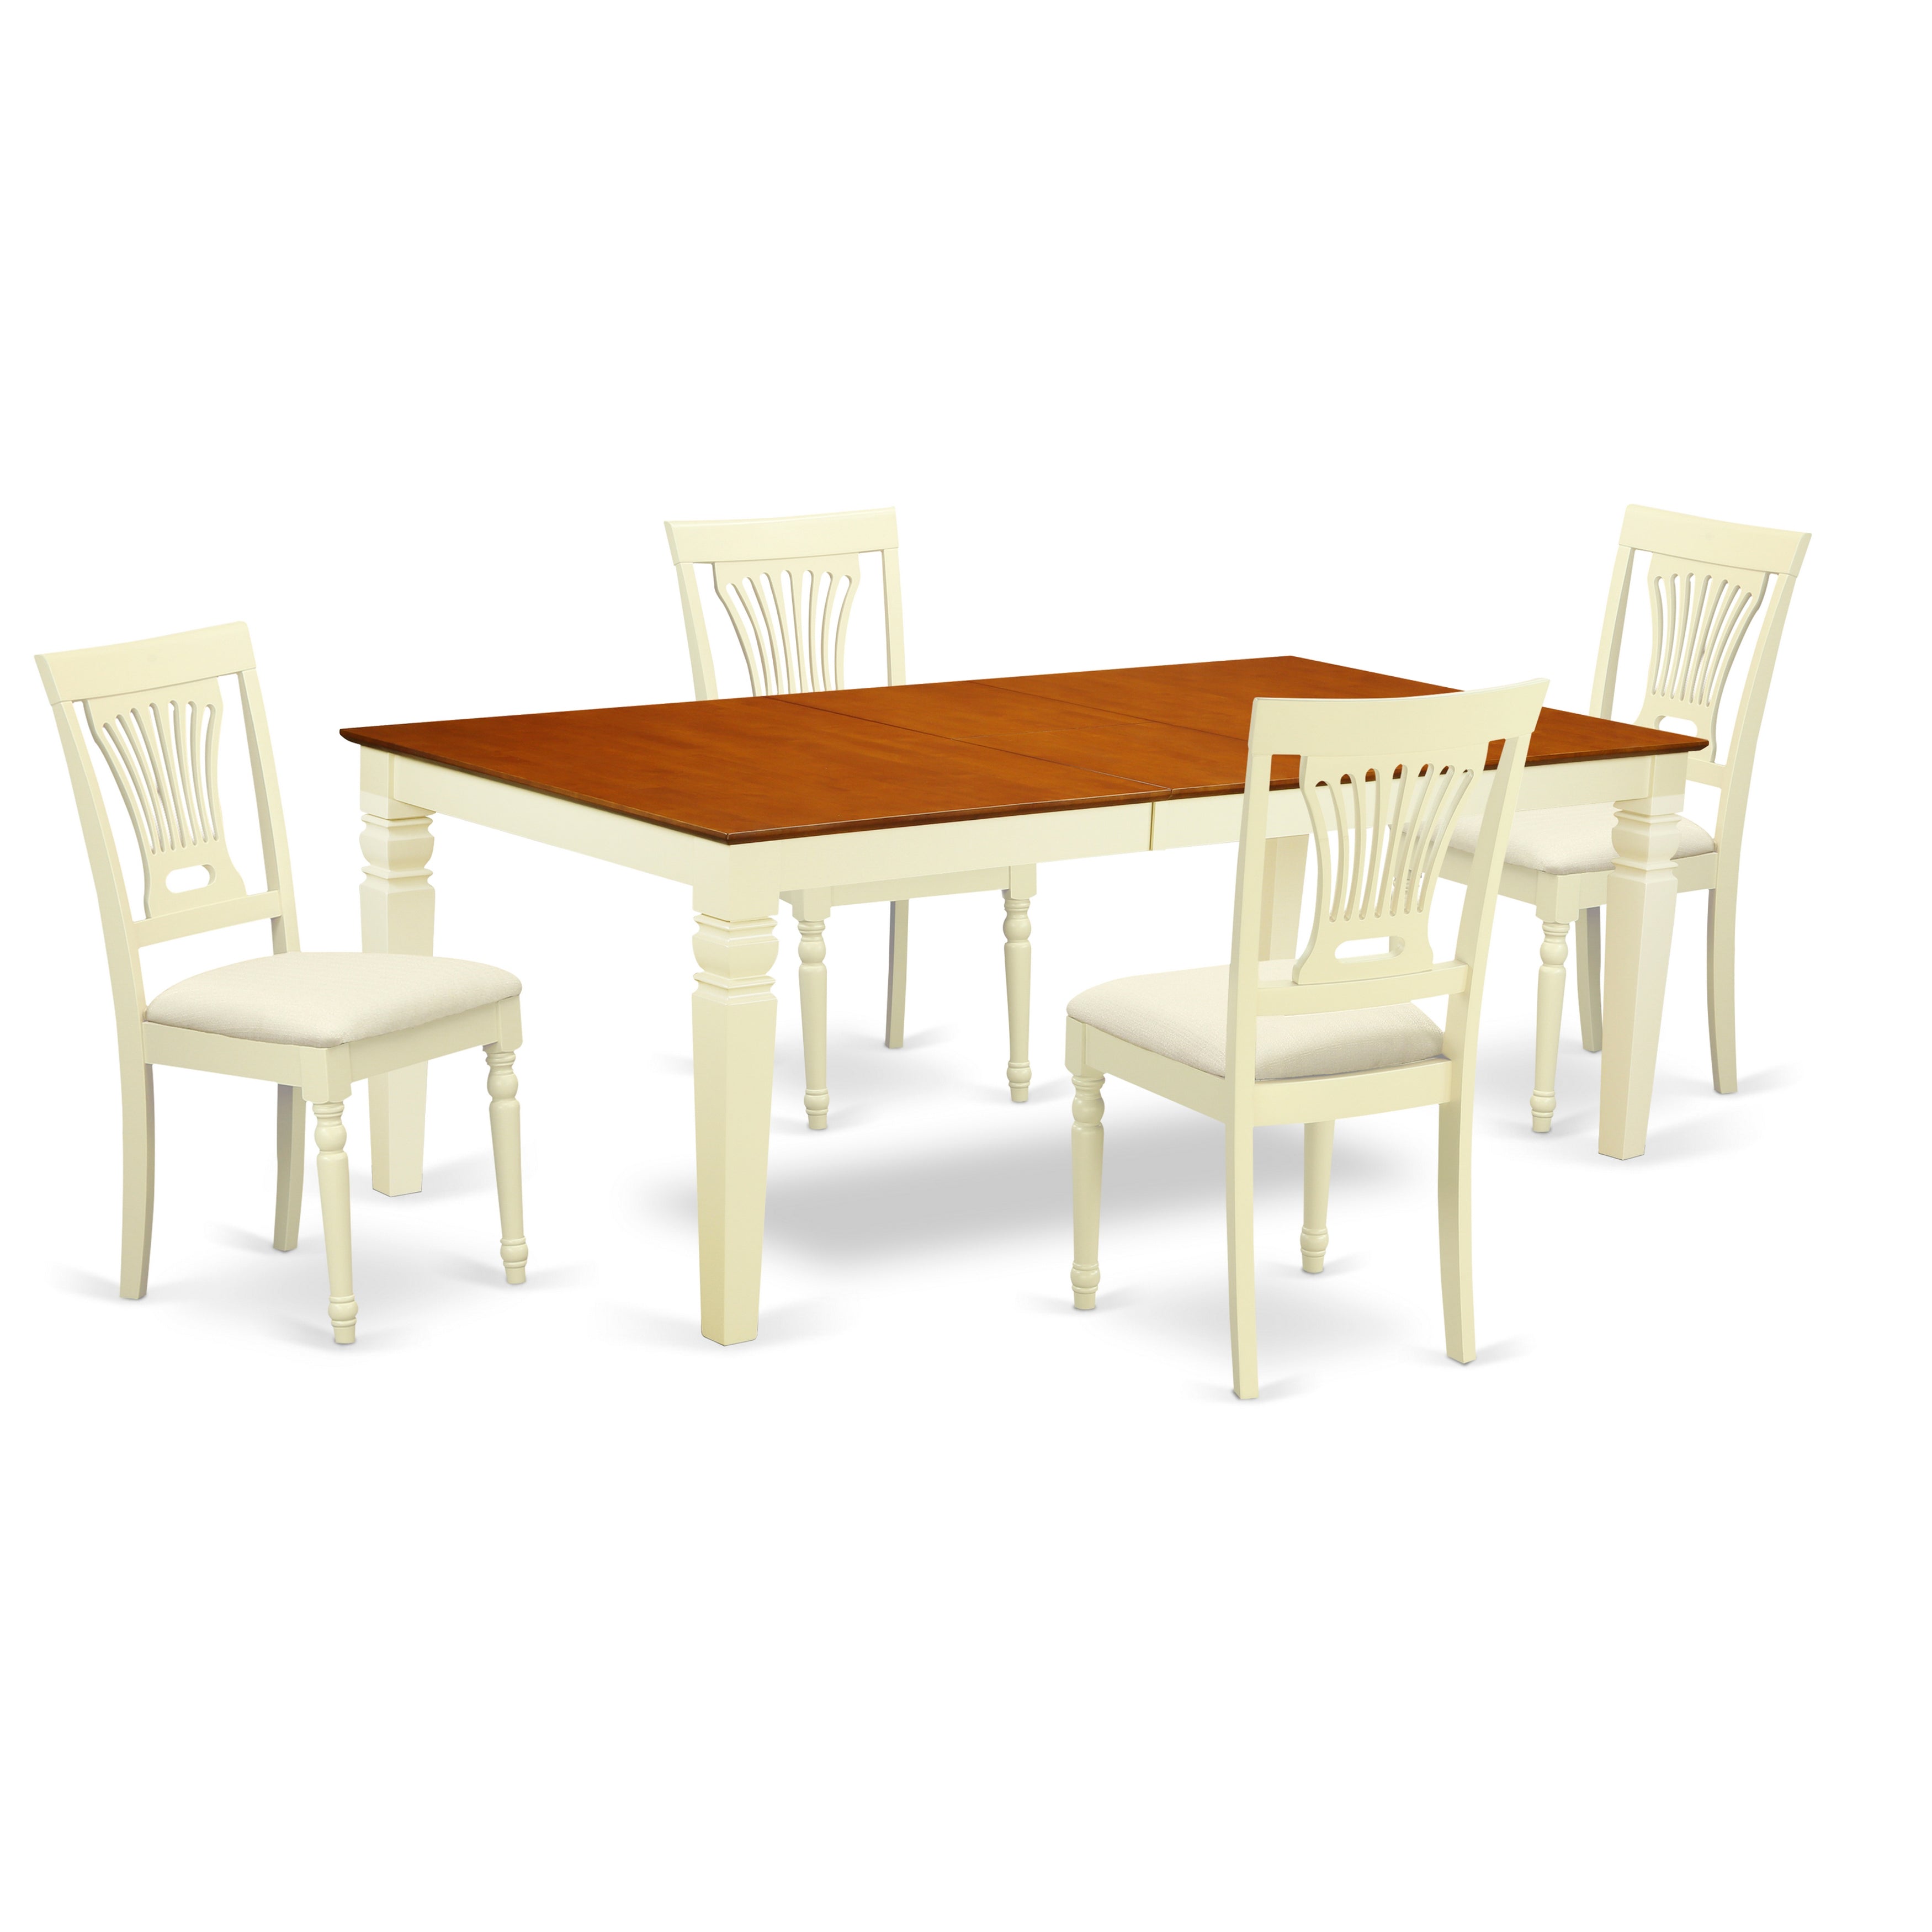 LGPL5-BMK-C 5 PC dinette set with a Dining Table and 4 Kitchen Chairs in Buttermilk and Cherry